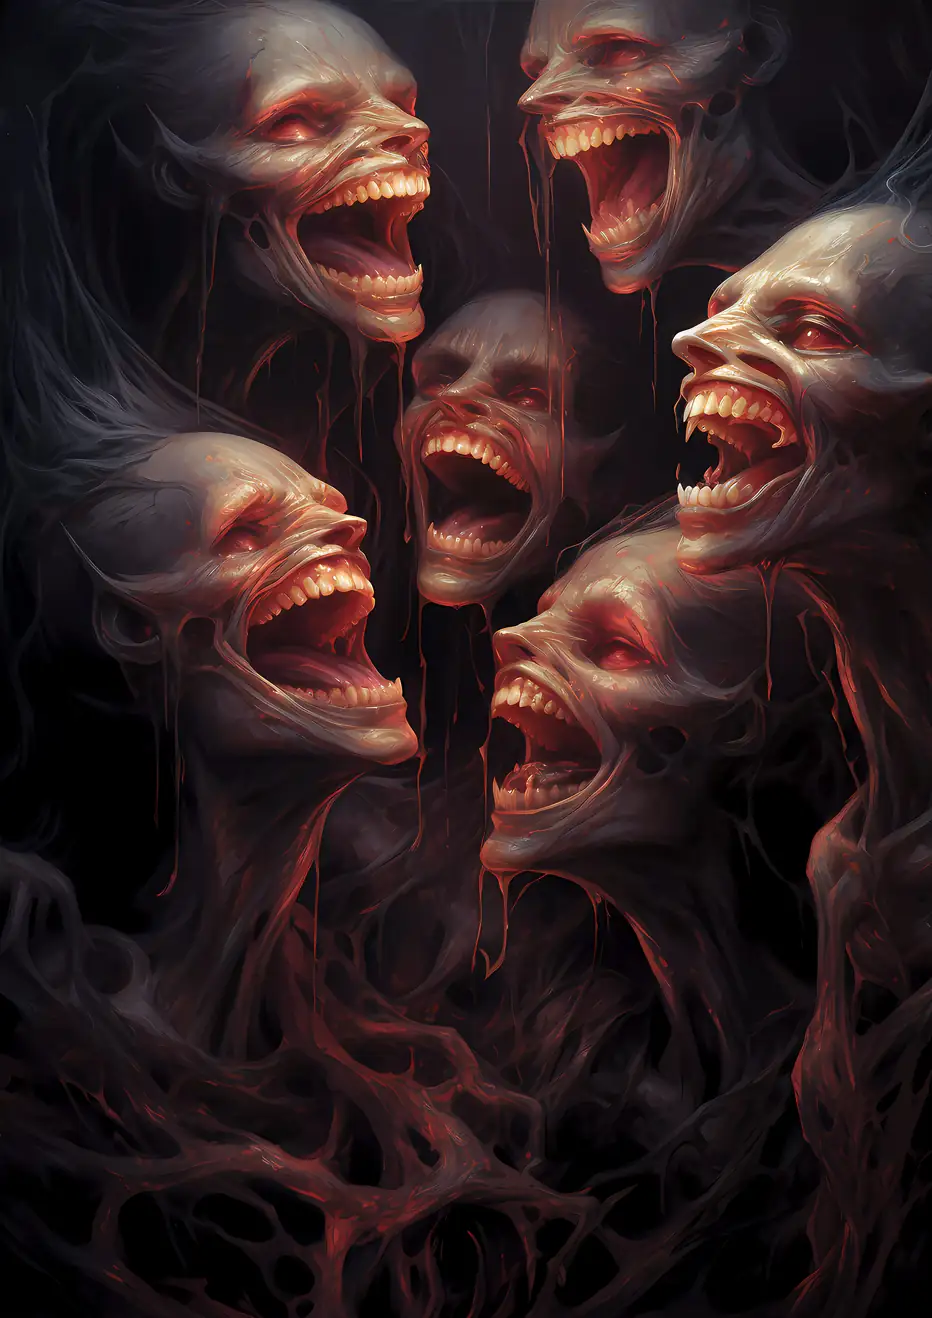 A group of five pale figures with red eyes laughing maniacally amidst the darkness in "Sinister Symphonies."